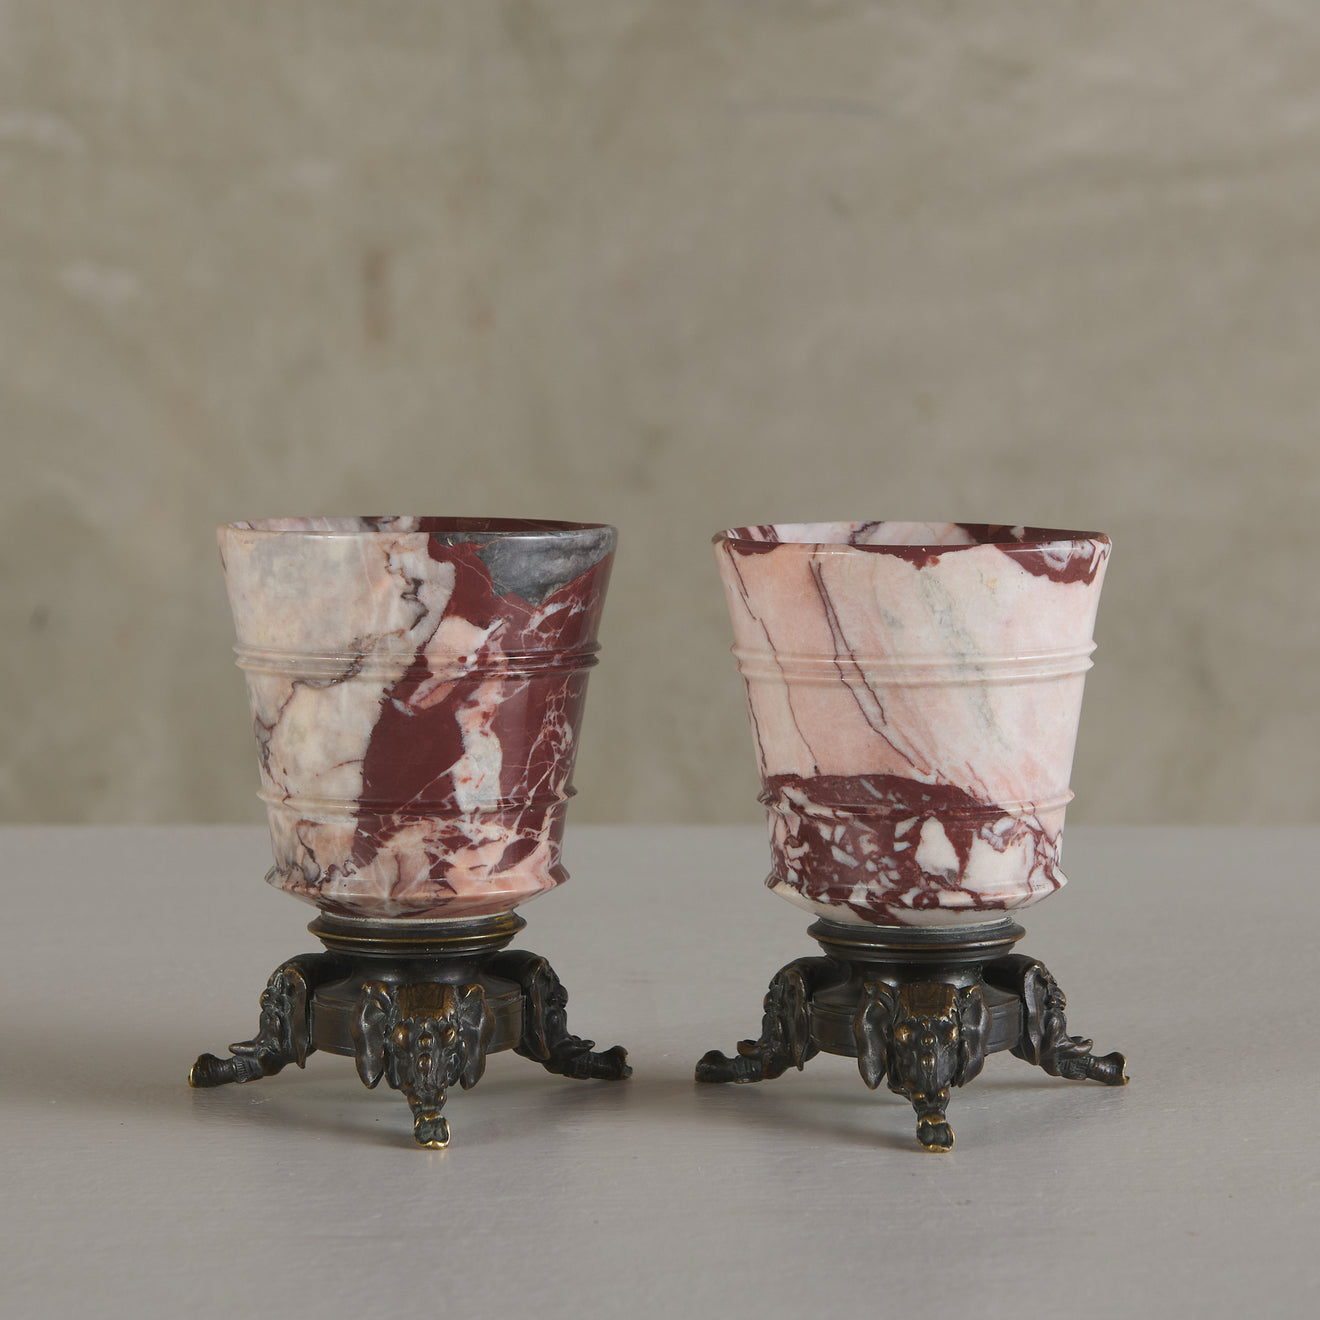 PAIR OF GRAND TOUR URNS WITH ELEPHANT TRIPOD BASES